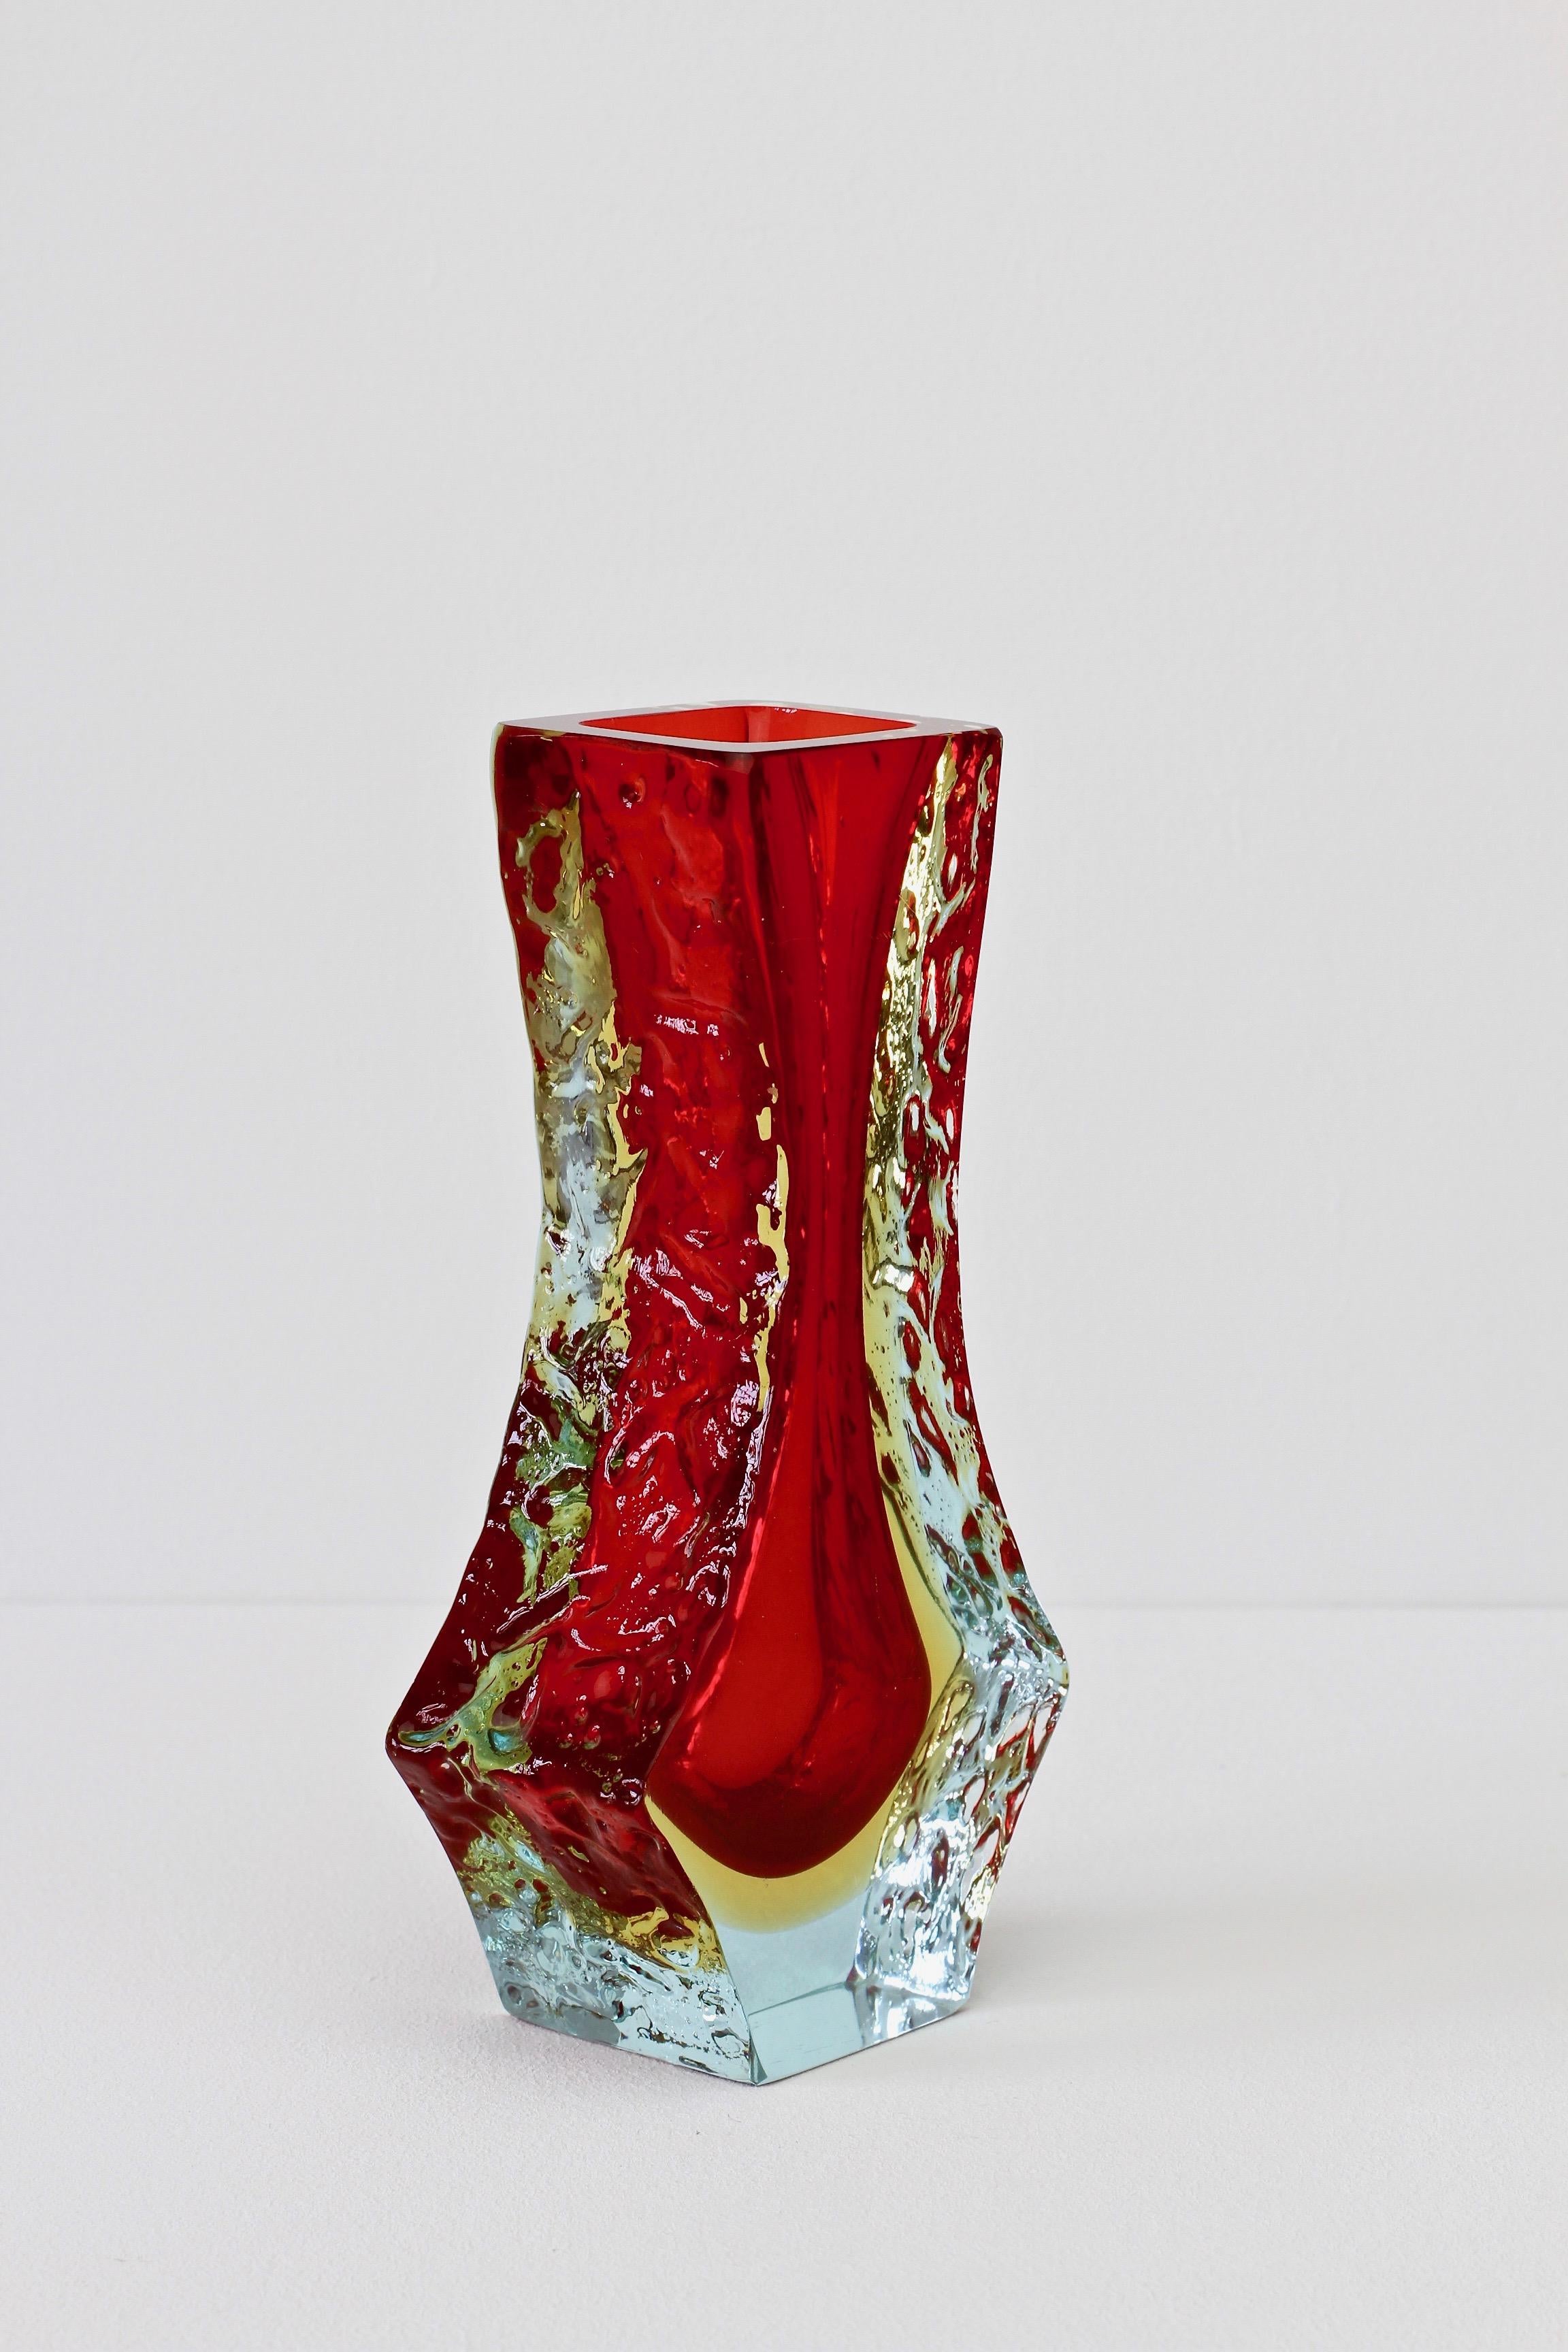 Mid-Century Modern Italian Textured Faceted Murano 'Sommerso' Glass Vase Attributed to Mandruzzato